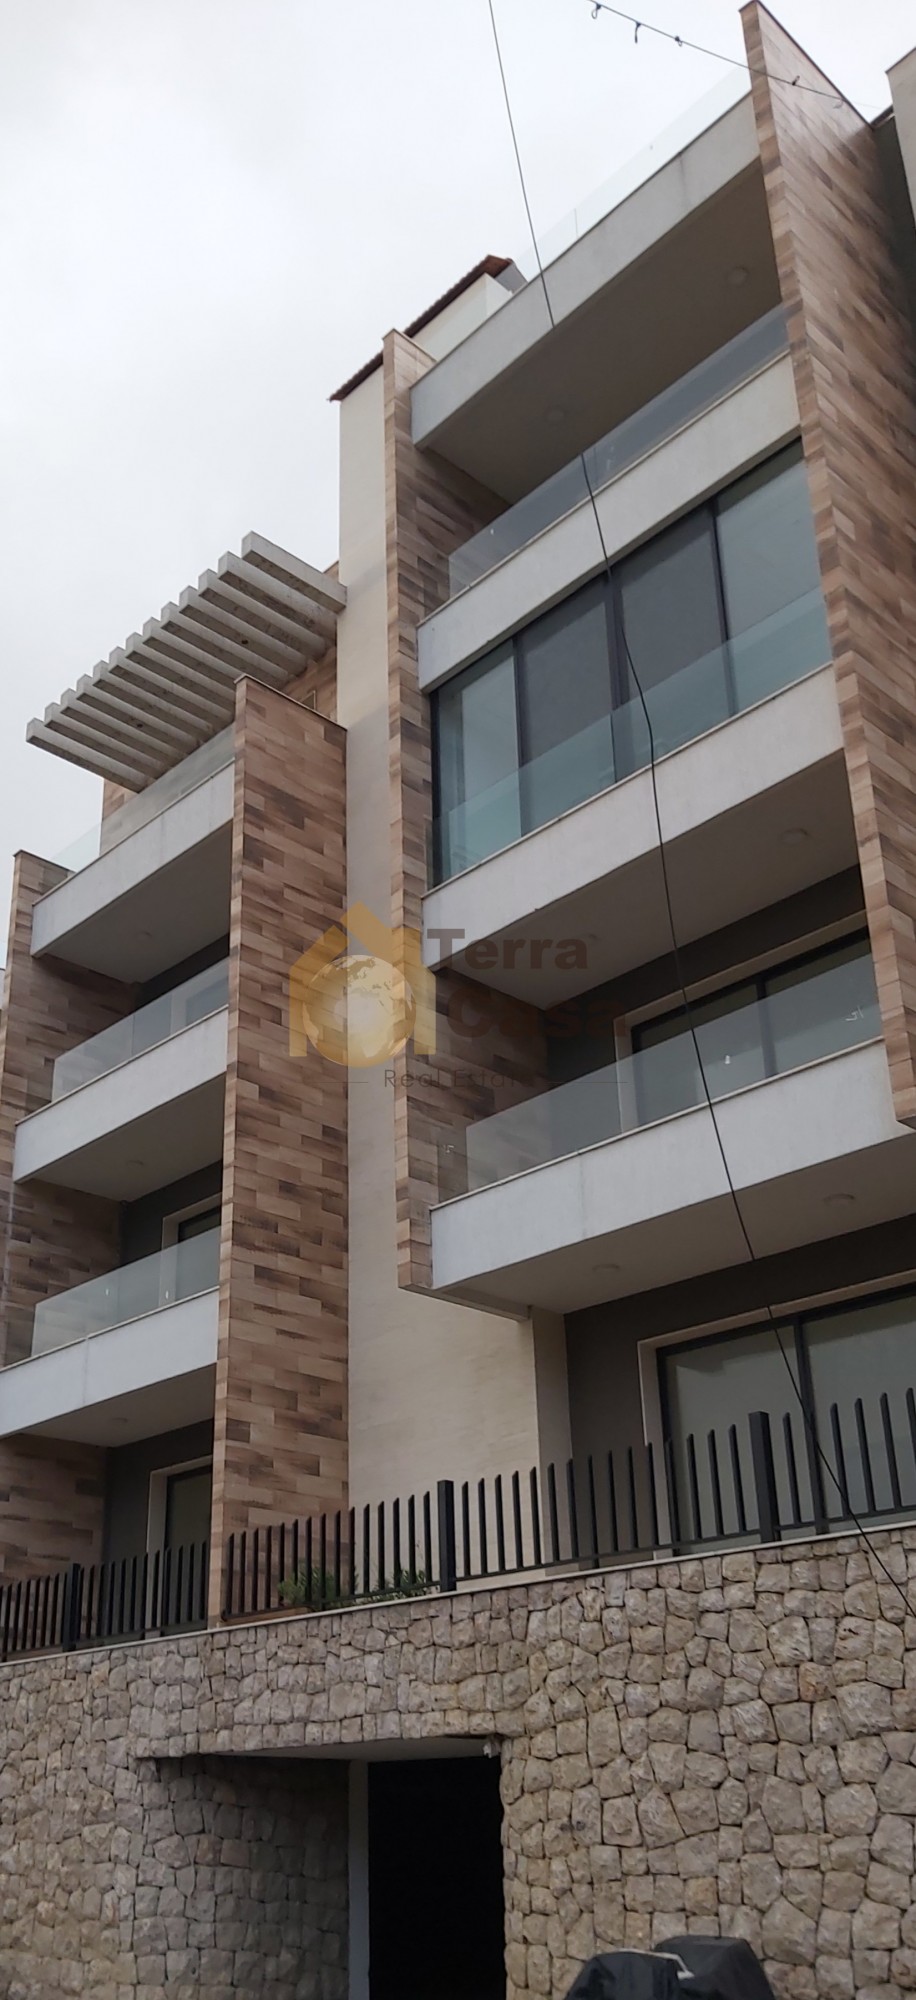 Brand new Duplex with 20 sqm terrace cash payment.